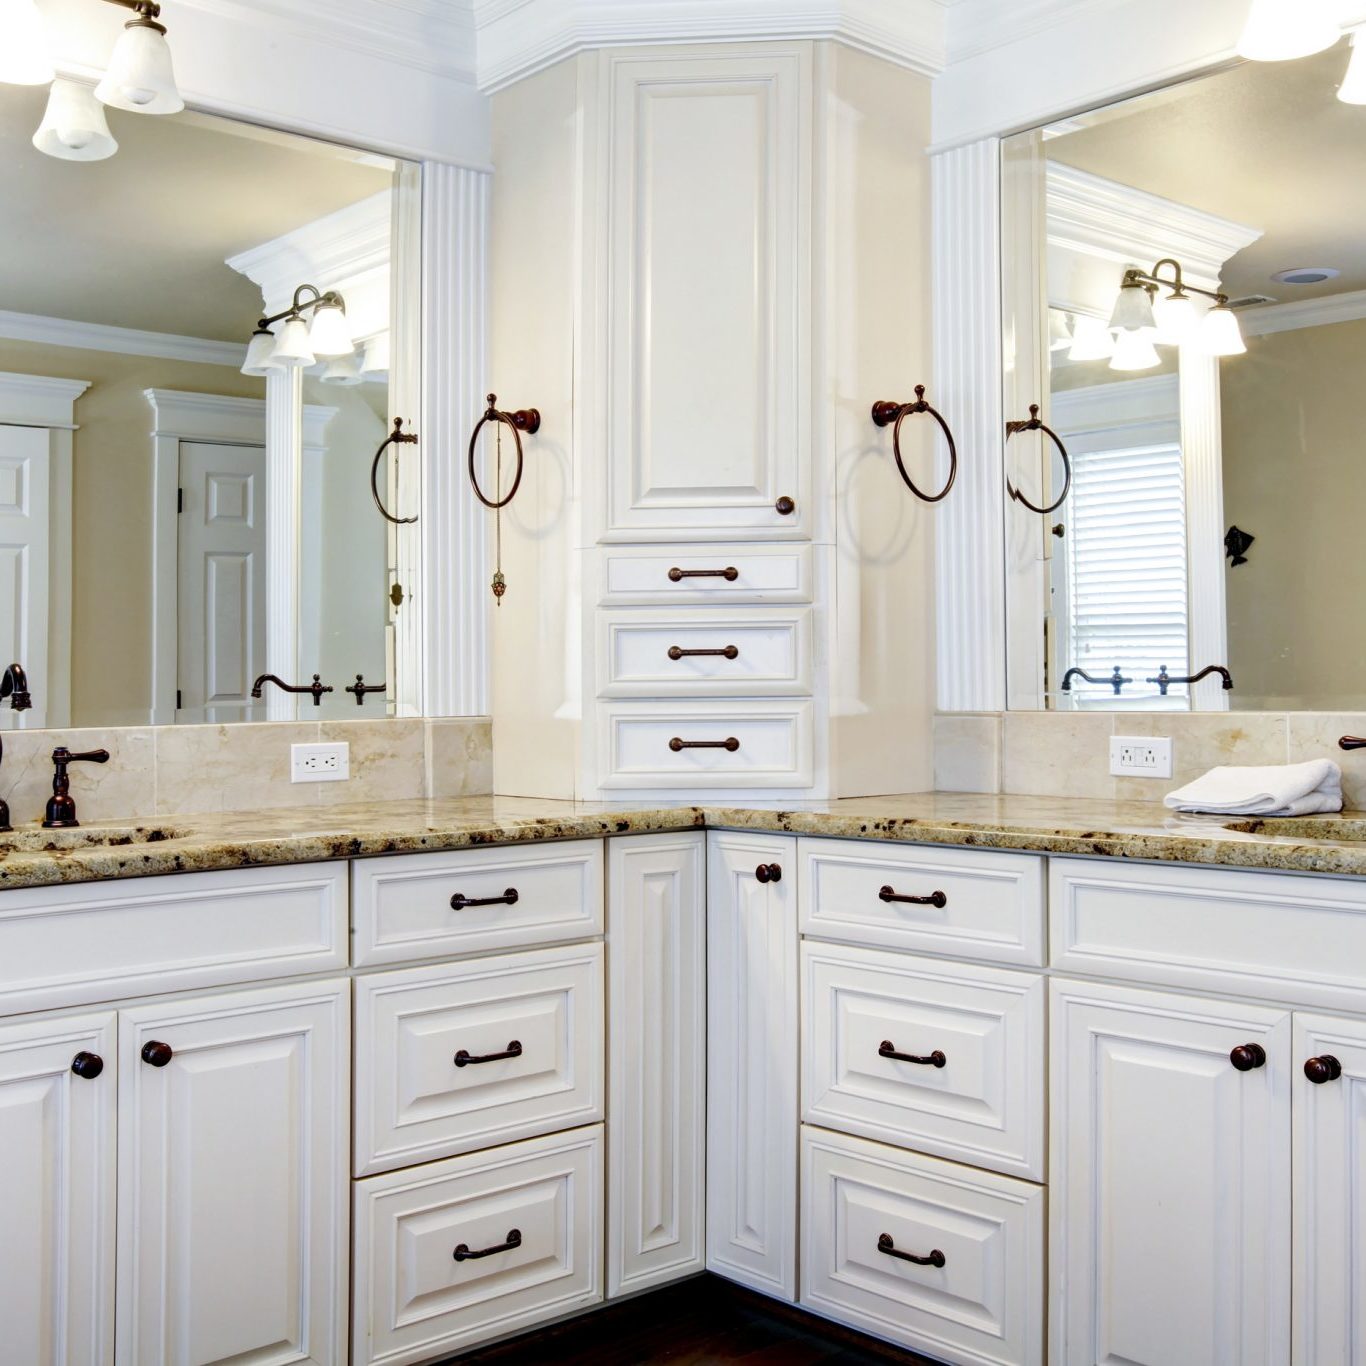 Luxury large white master bathroom cabinets with double sinks.